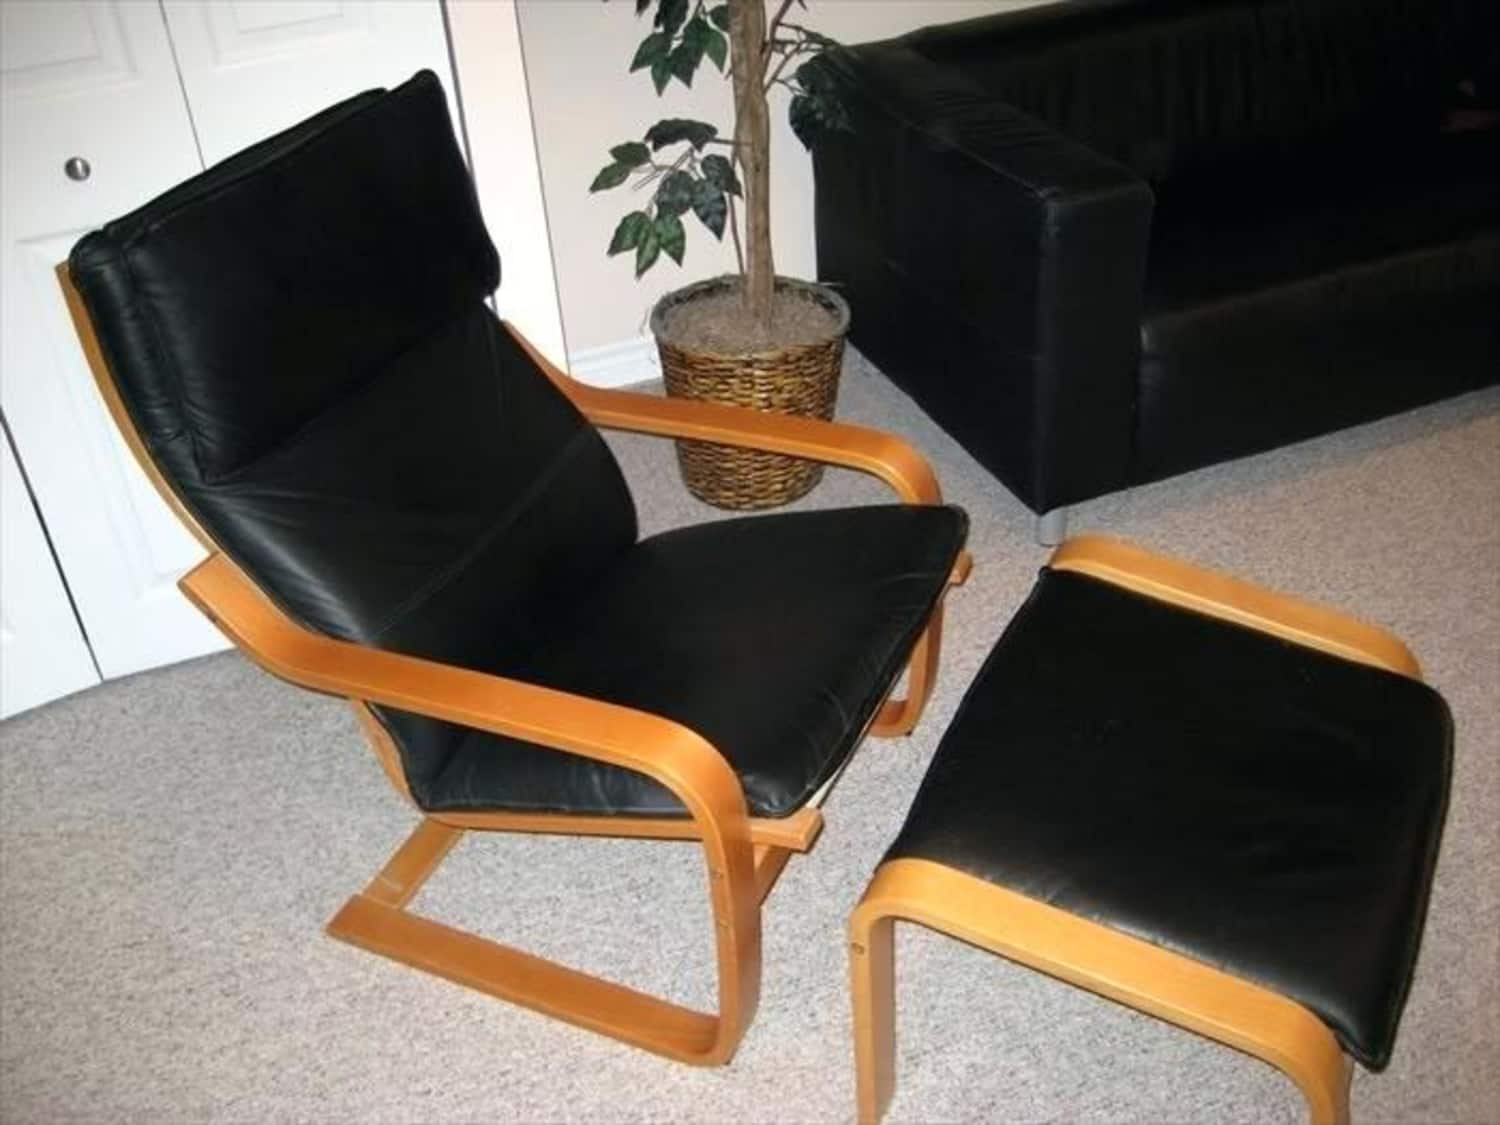 black leather Ikea Poang chair & footstool - Apartment Therapy's Bazaar.